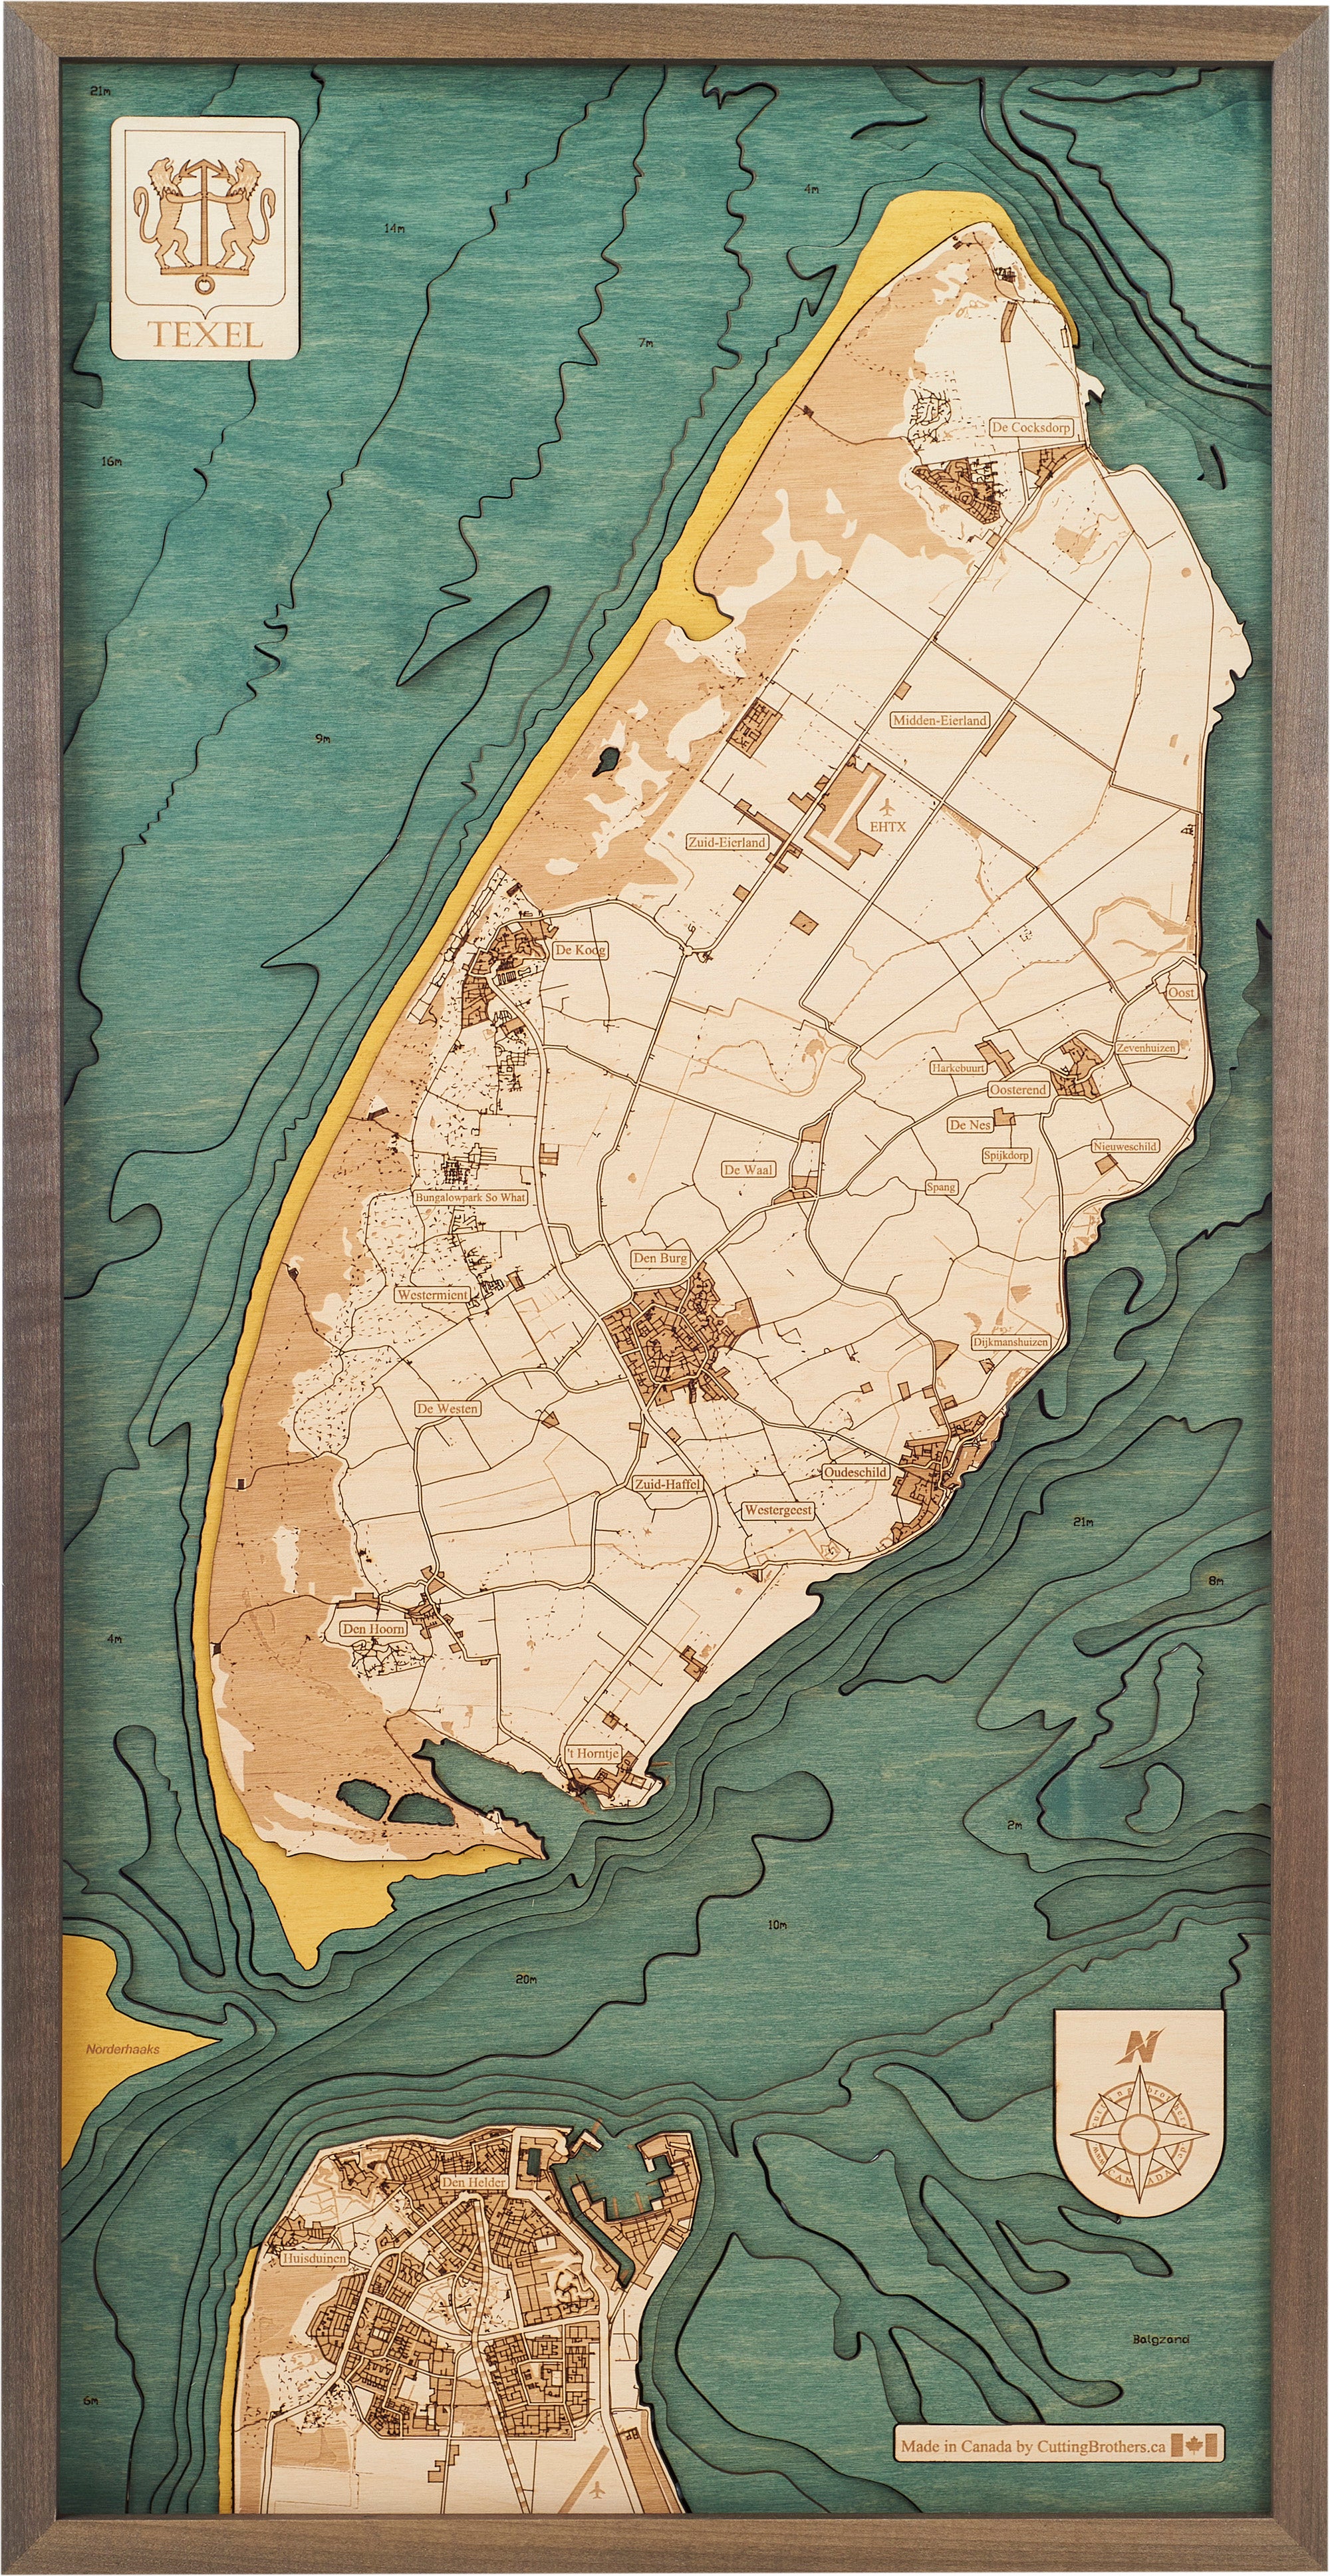 TEXEL 3D wooden wall map - version M 